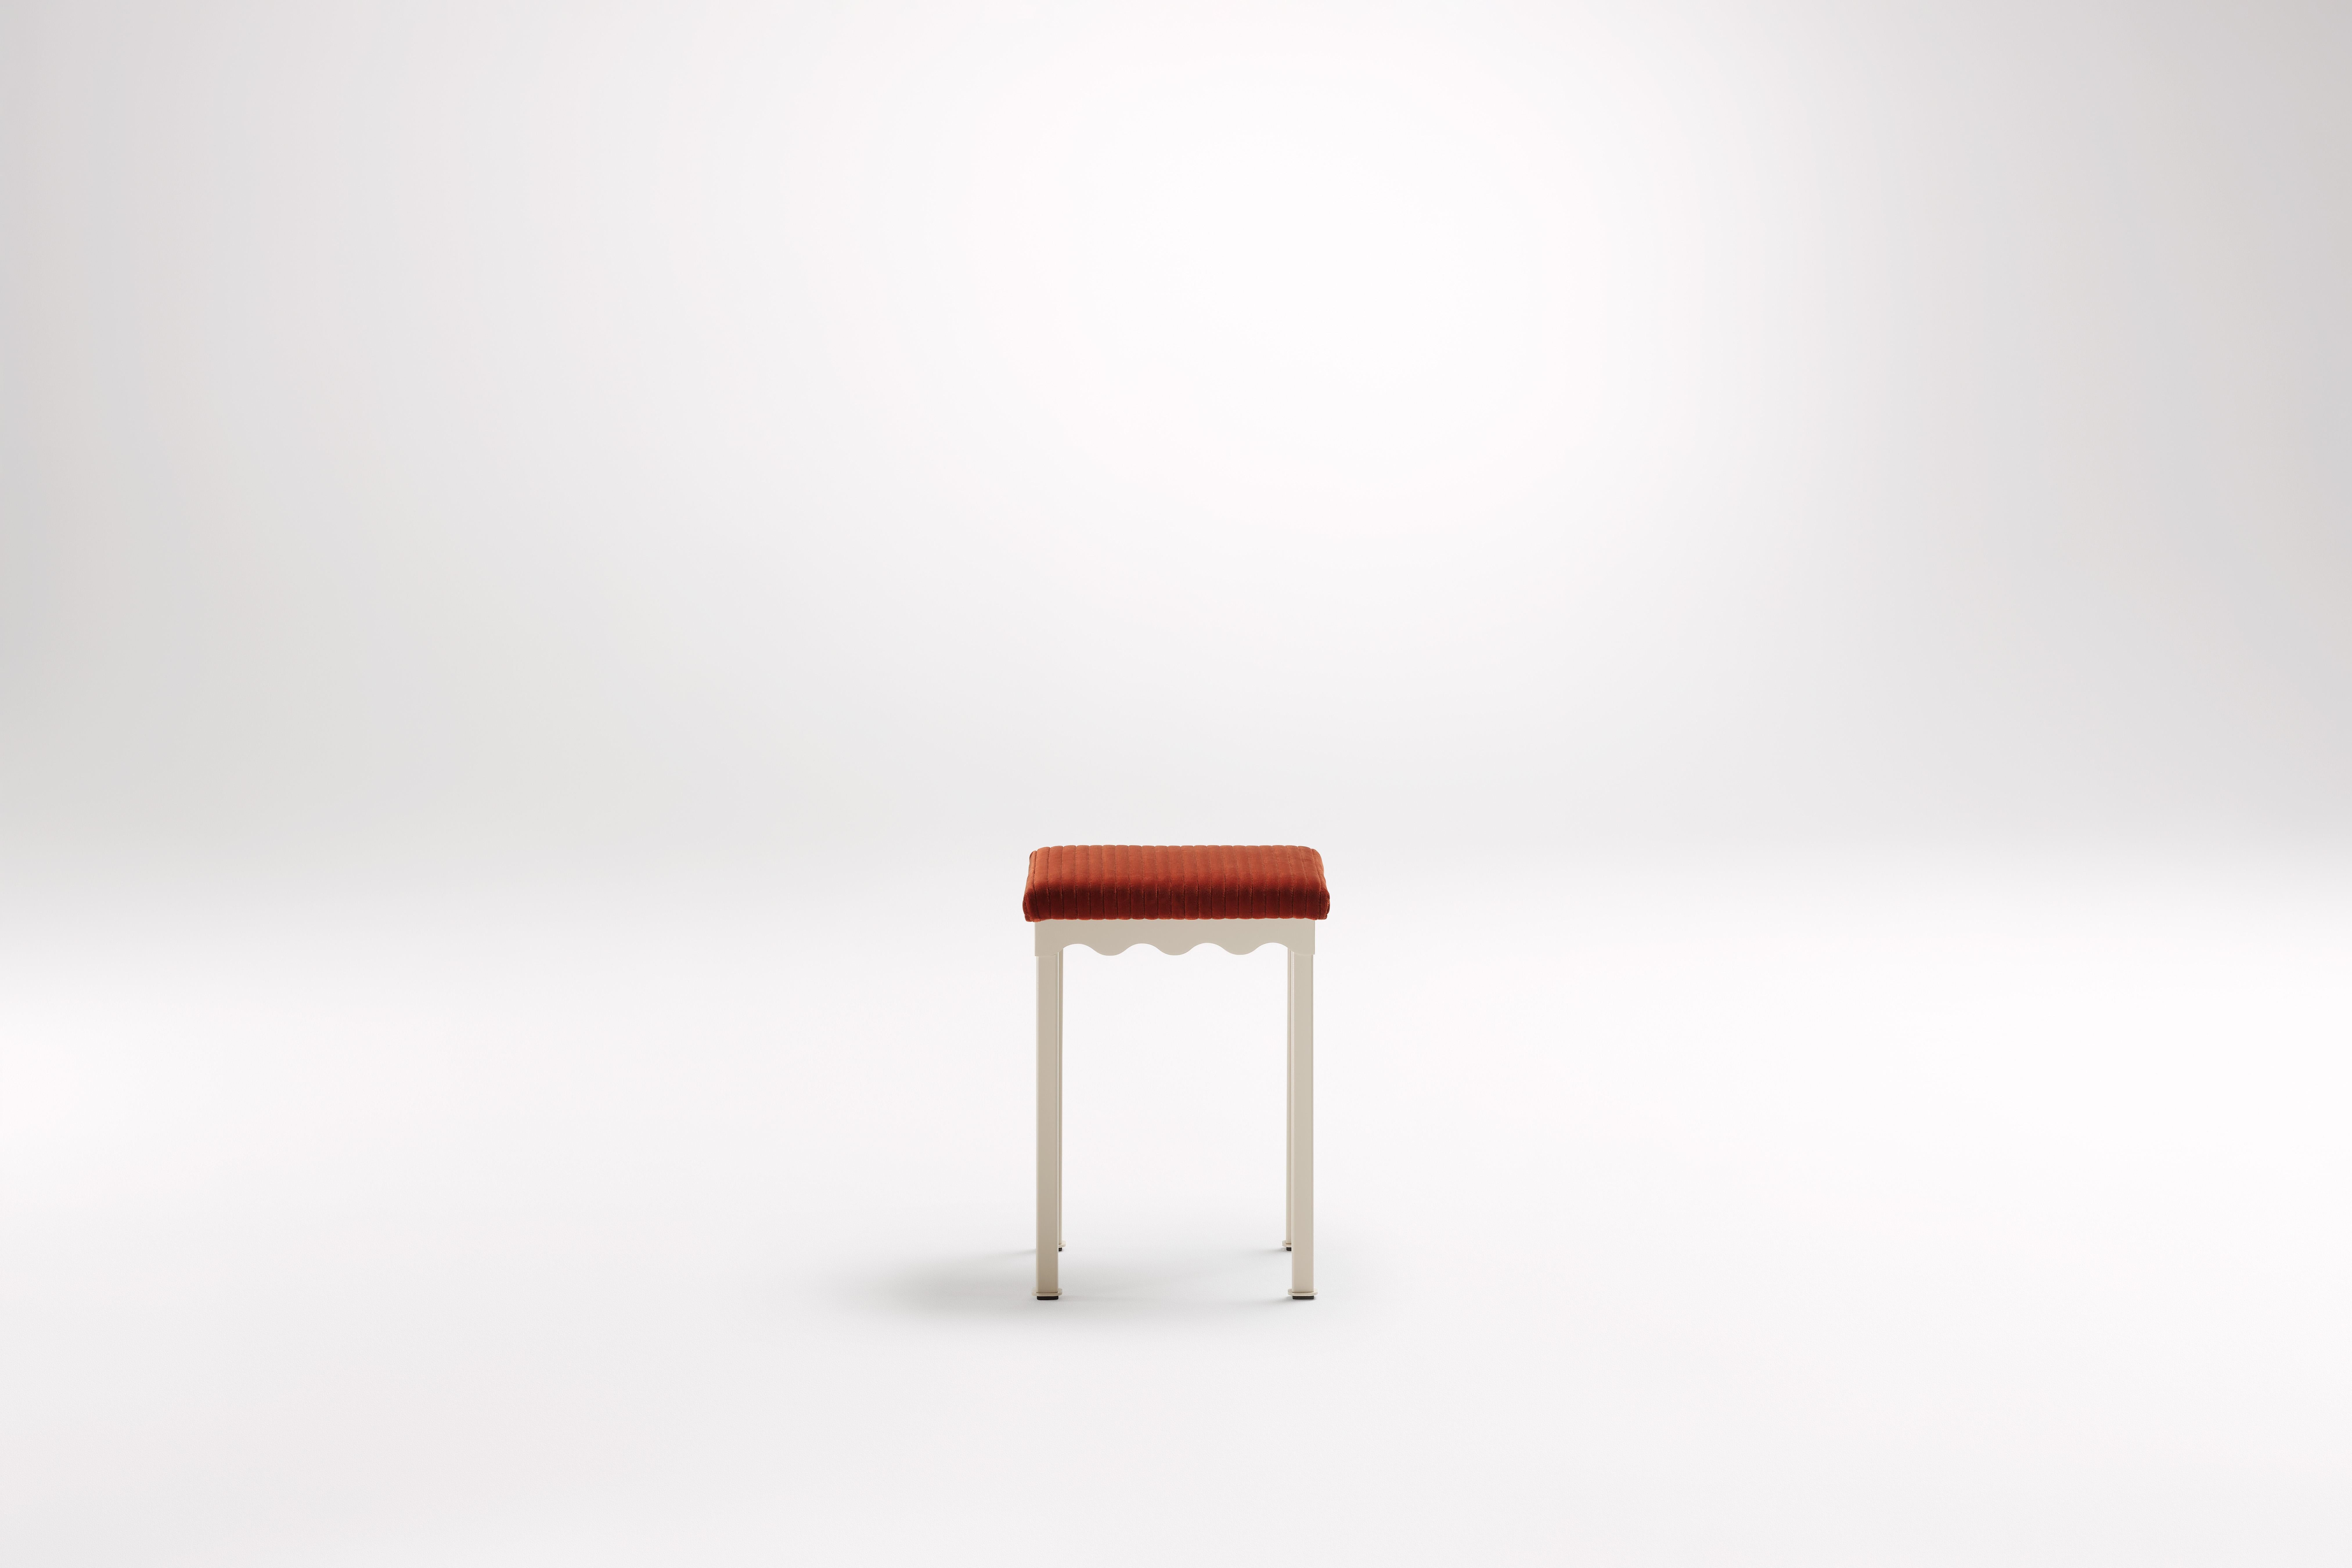 Sanguine Bellini Low Stool by Coco Flip
Dimensions: D 34 x W 34 x H 45 cm
Materials: Timber / Stone tops, Powder-coated steel frame. 
Weight: 5 kg
Frame Finishes: Textura Paperbark.

Coco Flip is a Melbourne based furniture and lighting design